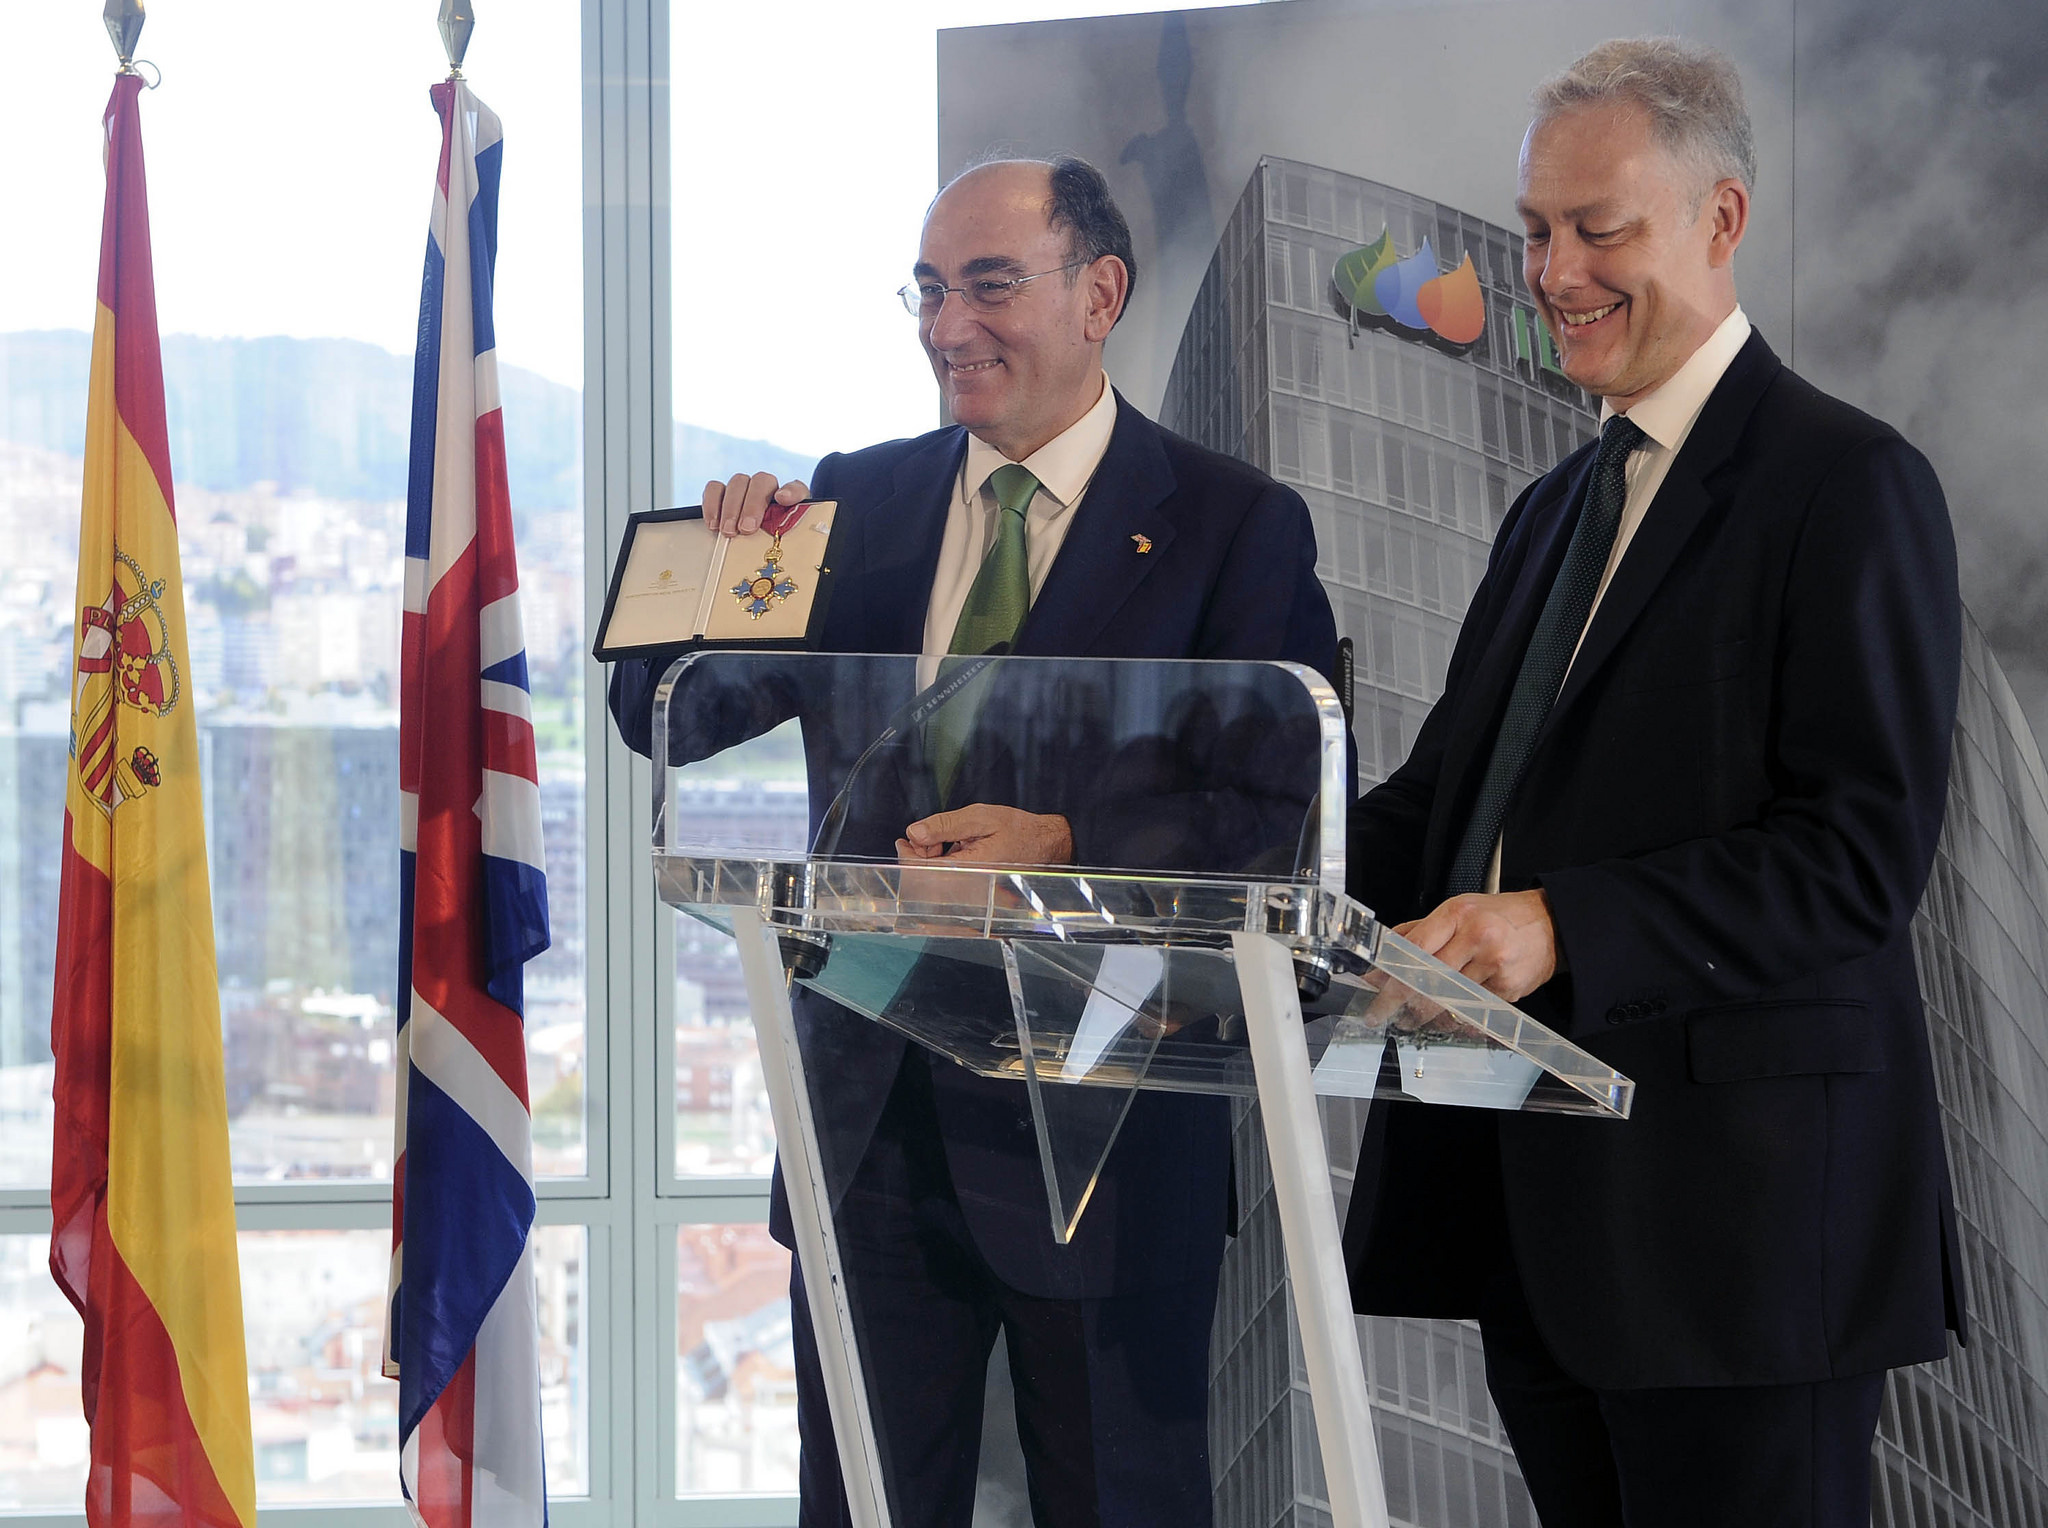 IBERDROLA Chairman Receives Commander of the Order of the British Empire Award